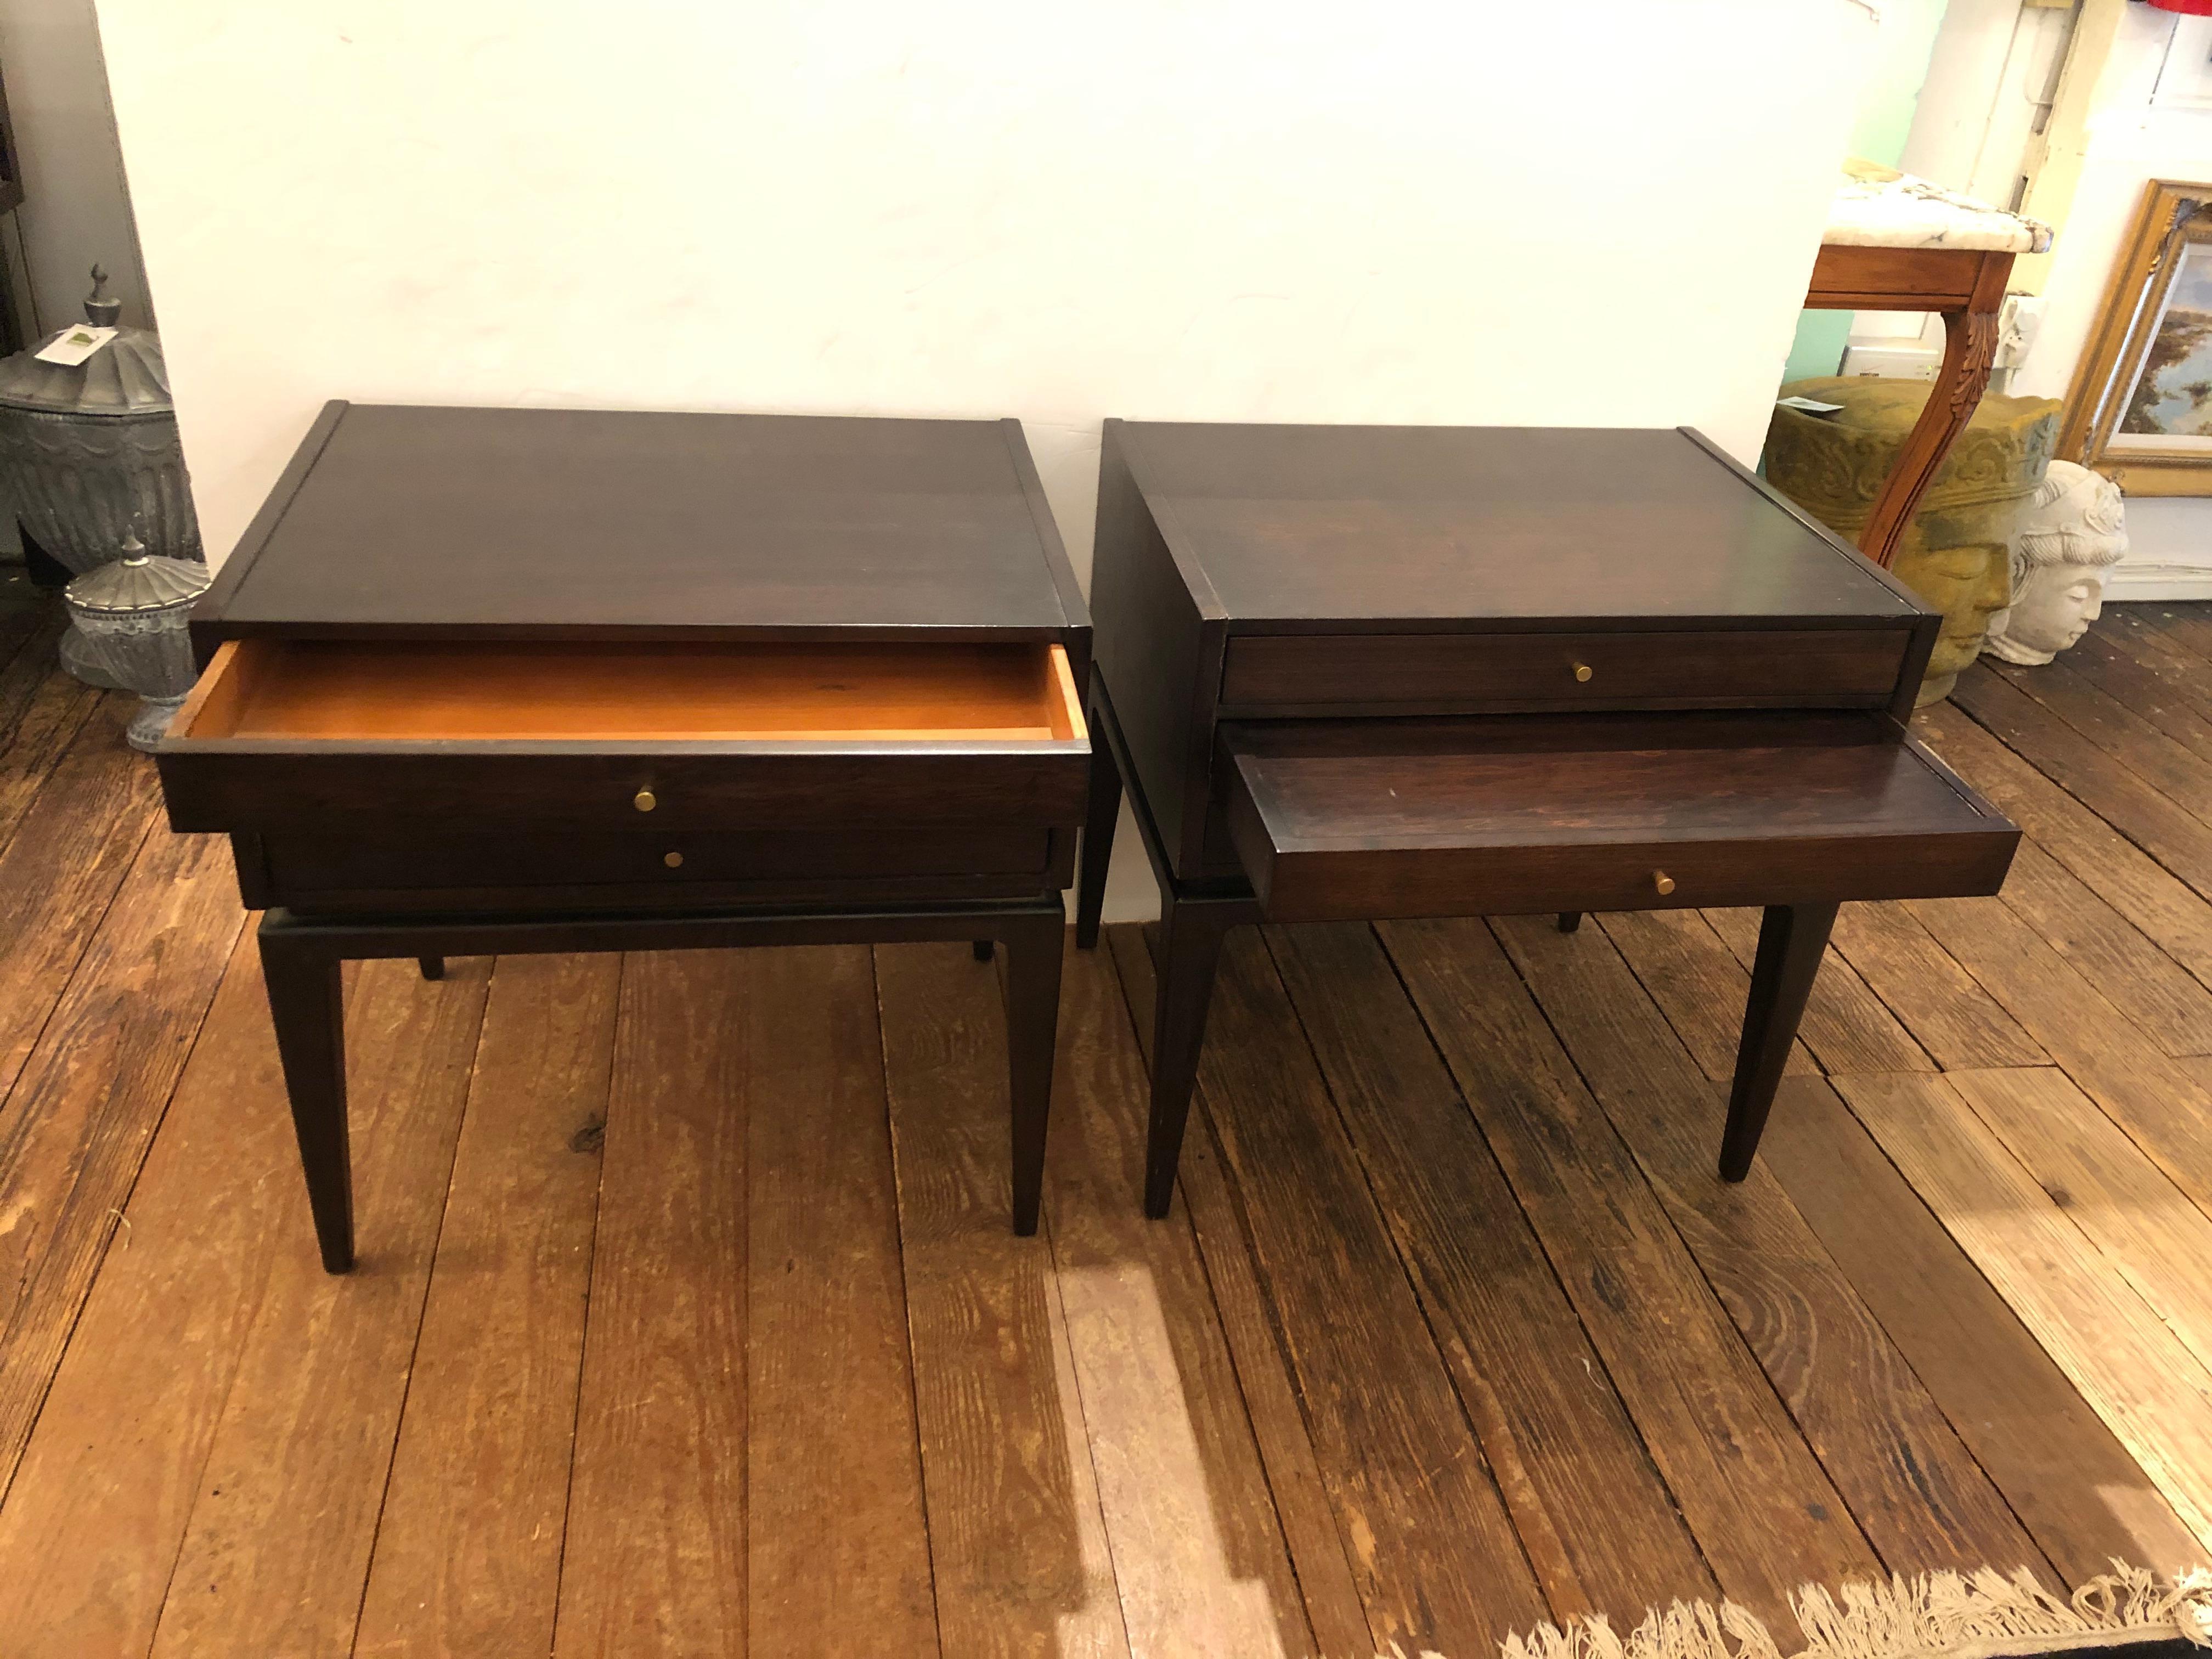 Very versatile and ingeniously designed pair of mahogany Mid-Century Modern end tables with Danish modern Silhouette, having what looks like three drawers, but in actuality each has a top single drawer over two pull out collapsible sturdy serving